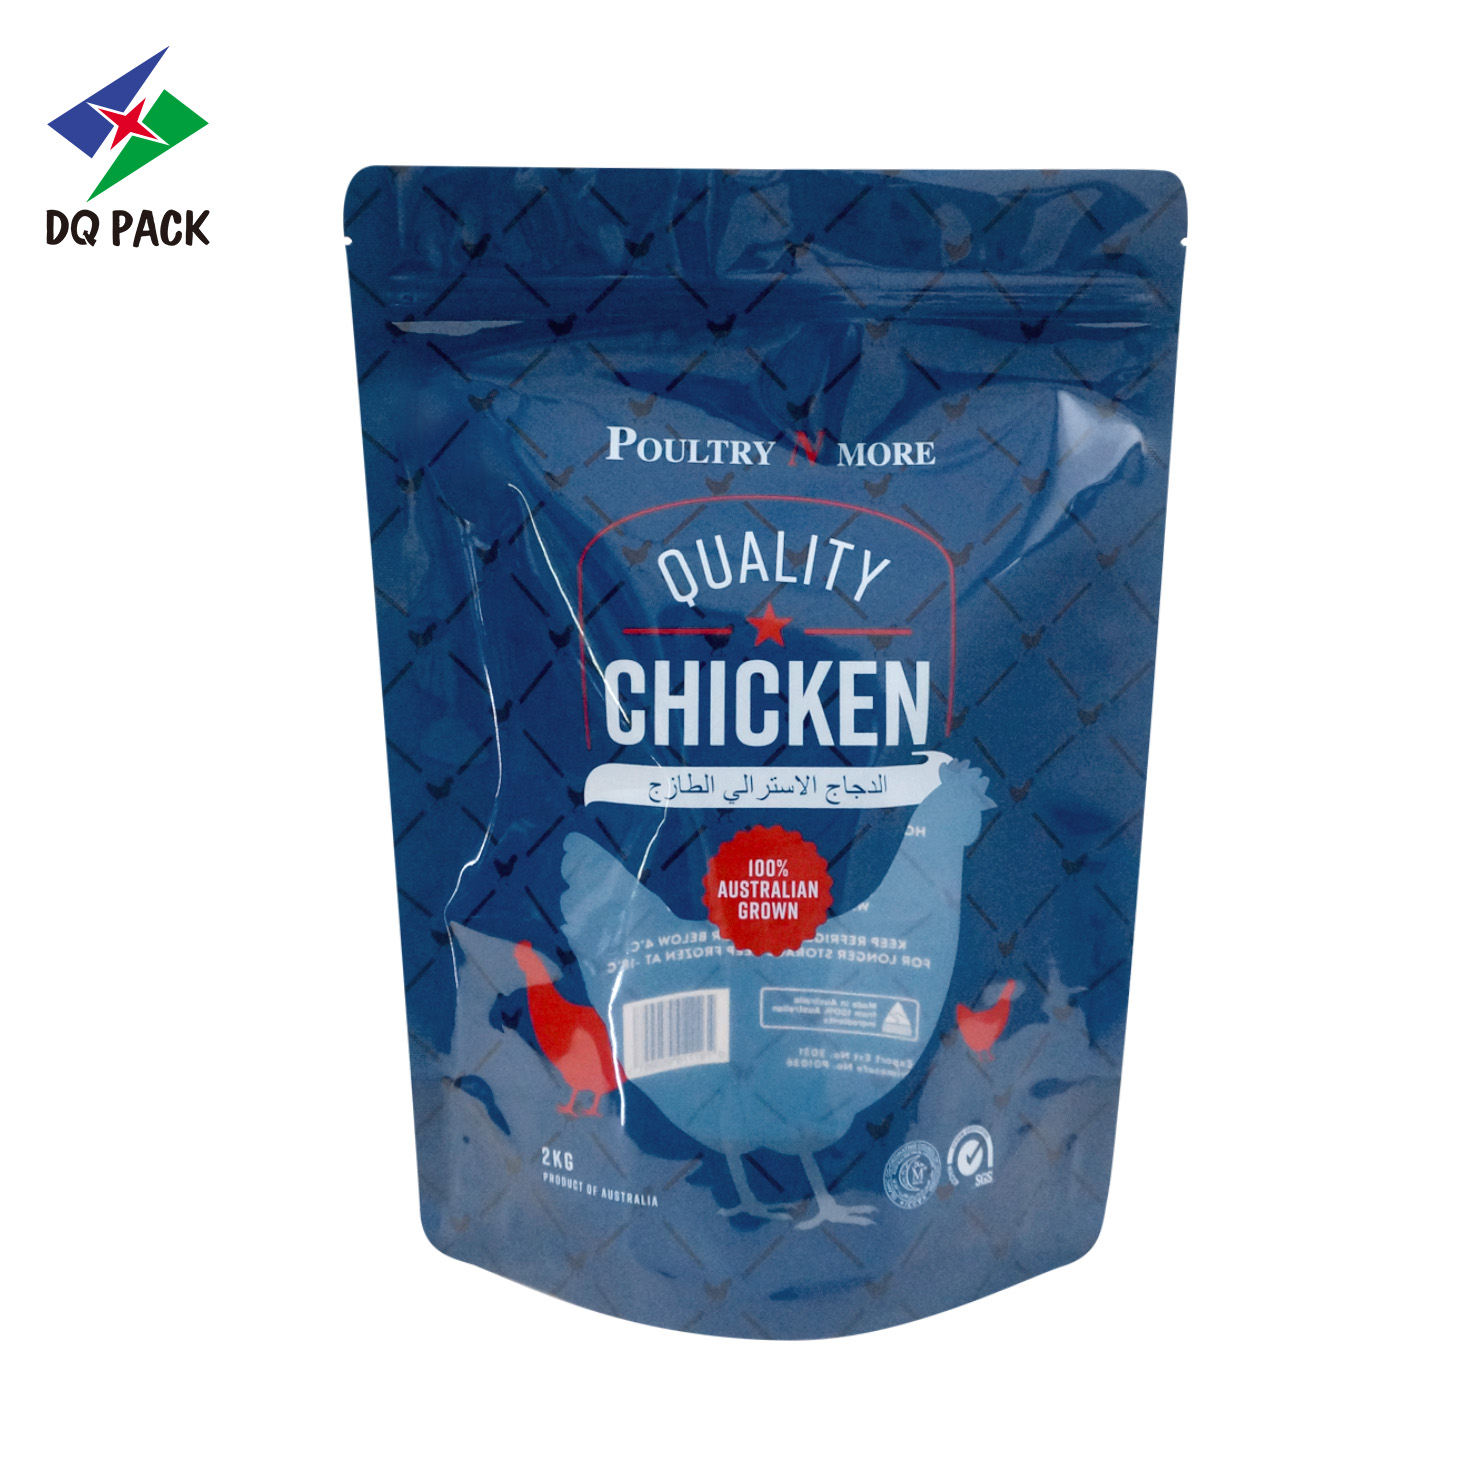 DQ PACK customized frozen chickenpackaging bag stand up pouch with zipper